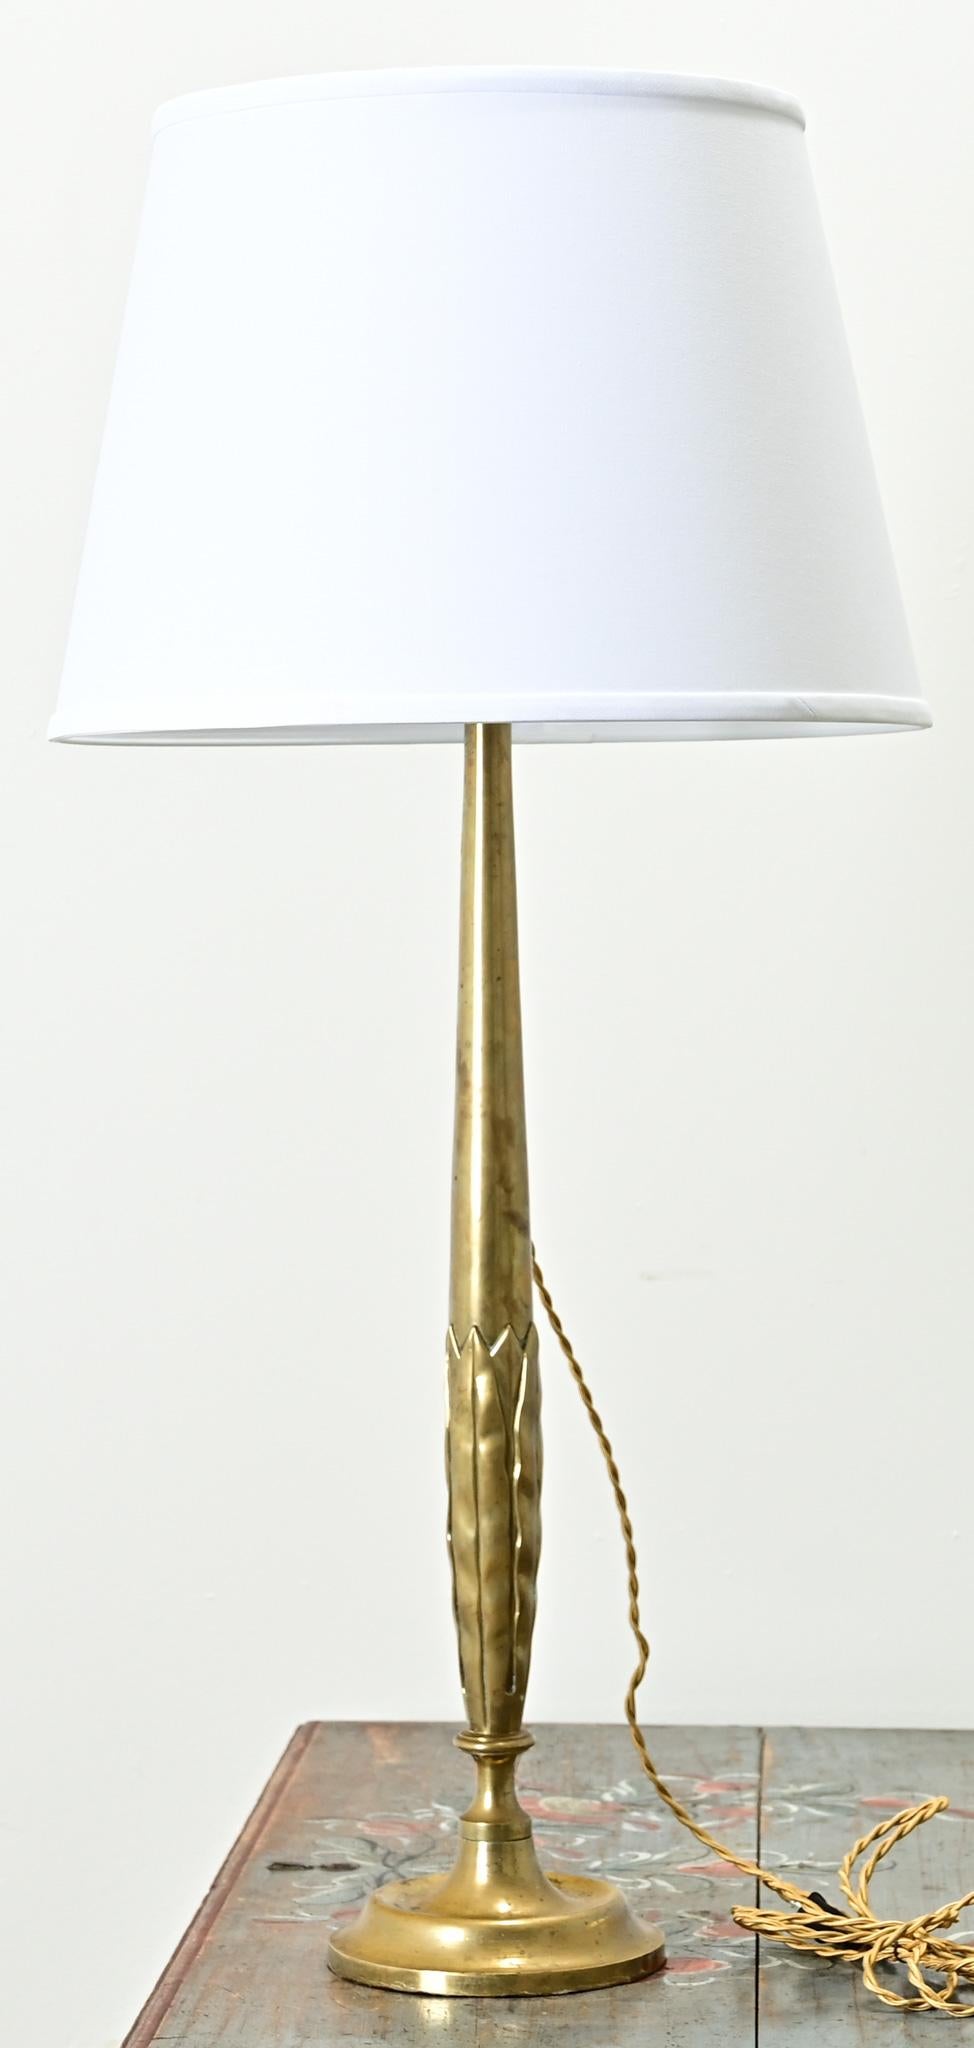 A tall and slender solid brass table lamp from France. A statement lamp, simple in design, with foliate details is lifted on a brass pedestal. This fixture has been recently wired for US electrical using UL listed parts with a new linen drum shade.